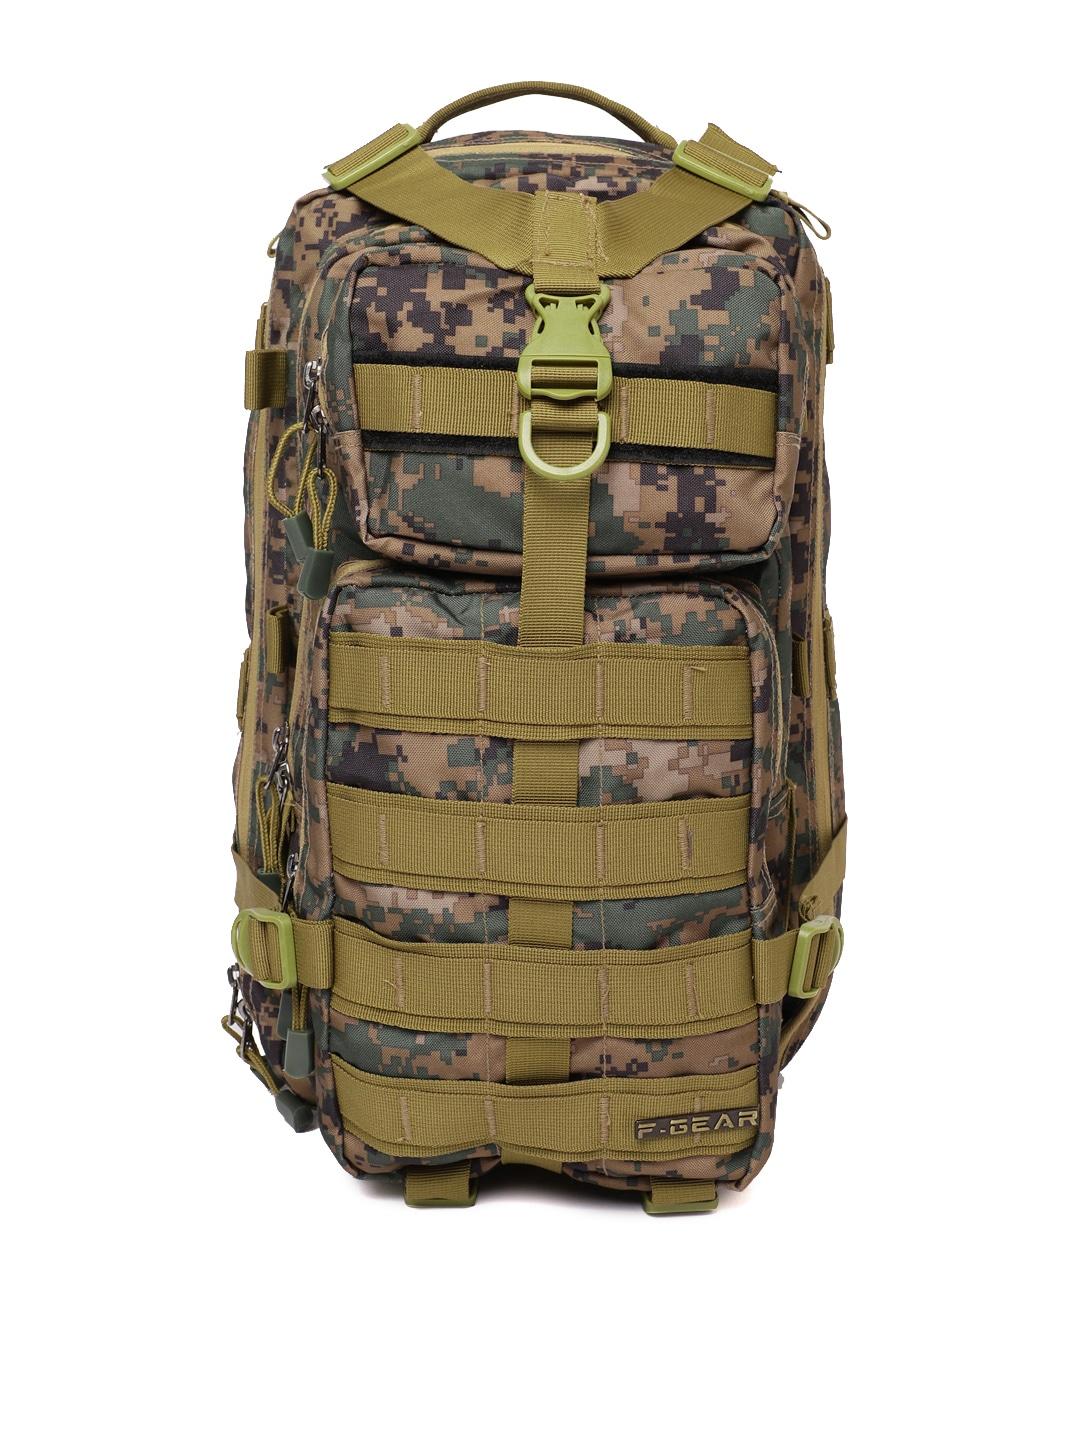 f-gear-unisex-green-&-brown-military-tactical-marpat-graphic-printed-backpack